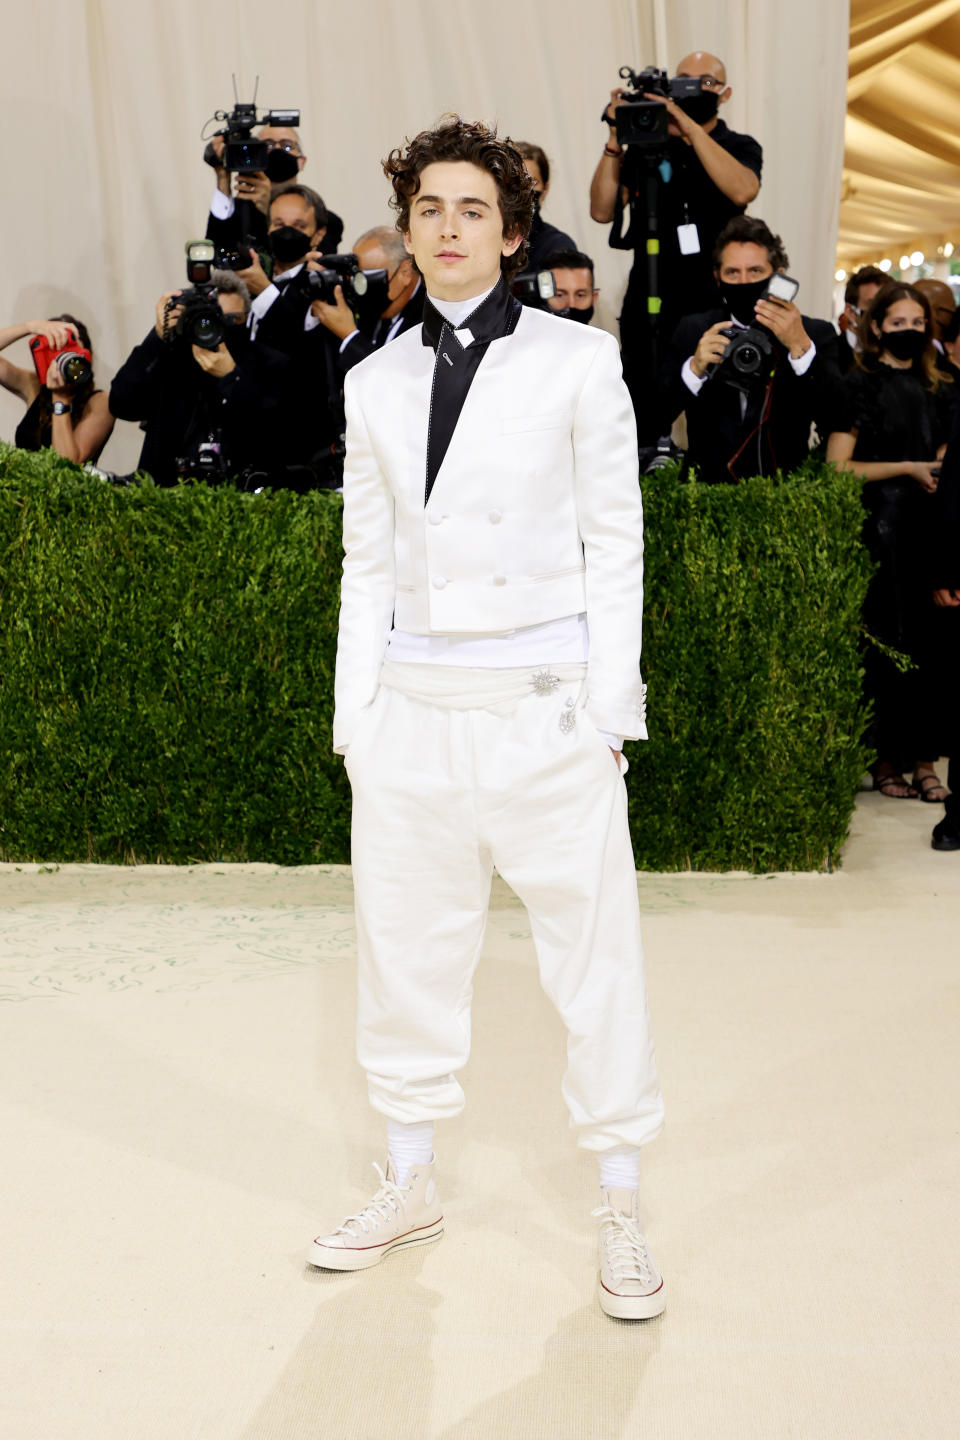 Co-chair Timothee Chalamet attends The 2021 Met Gala Celebrating In America: A Lexicon Of Fashion at Metropolitan Museum of Art on September 13, 2021 in New York City. (Getty Images)